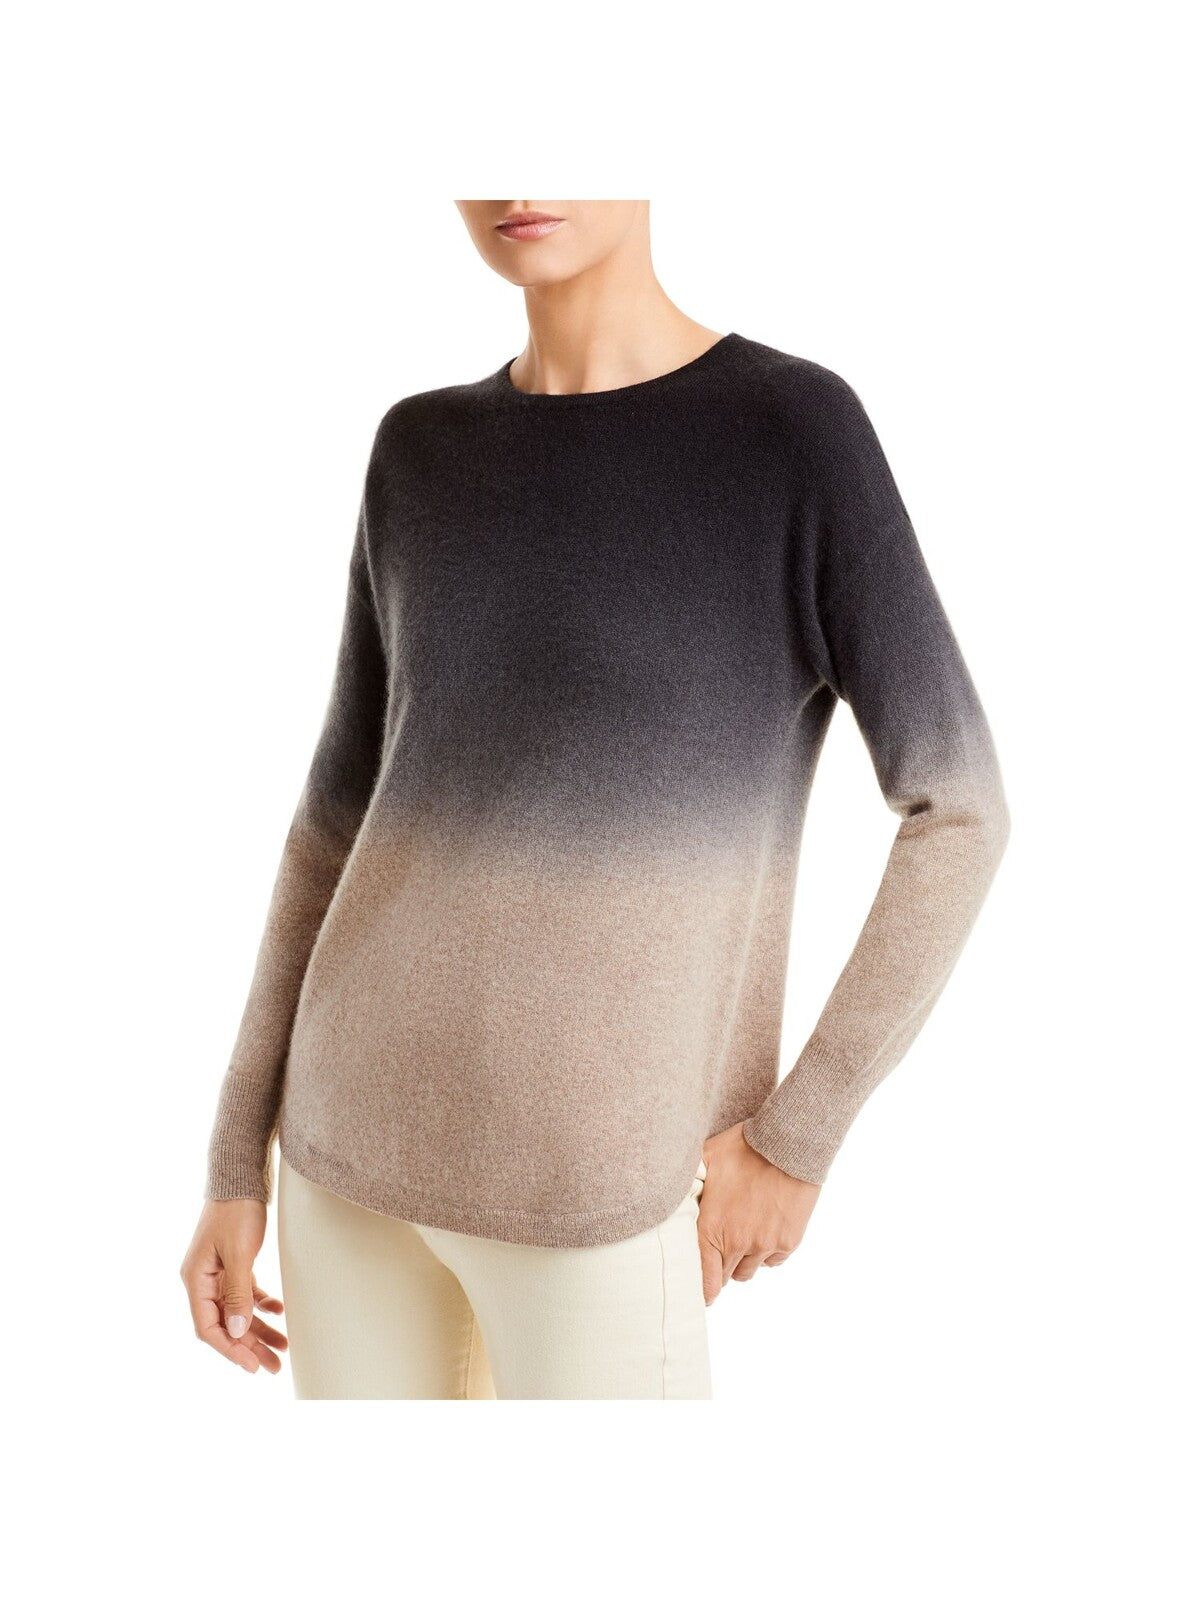 C Womens Beige Cashmere Ombre Long Sleeve Crew Neck Sweater M